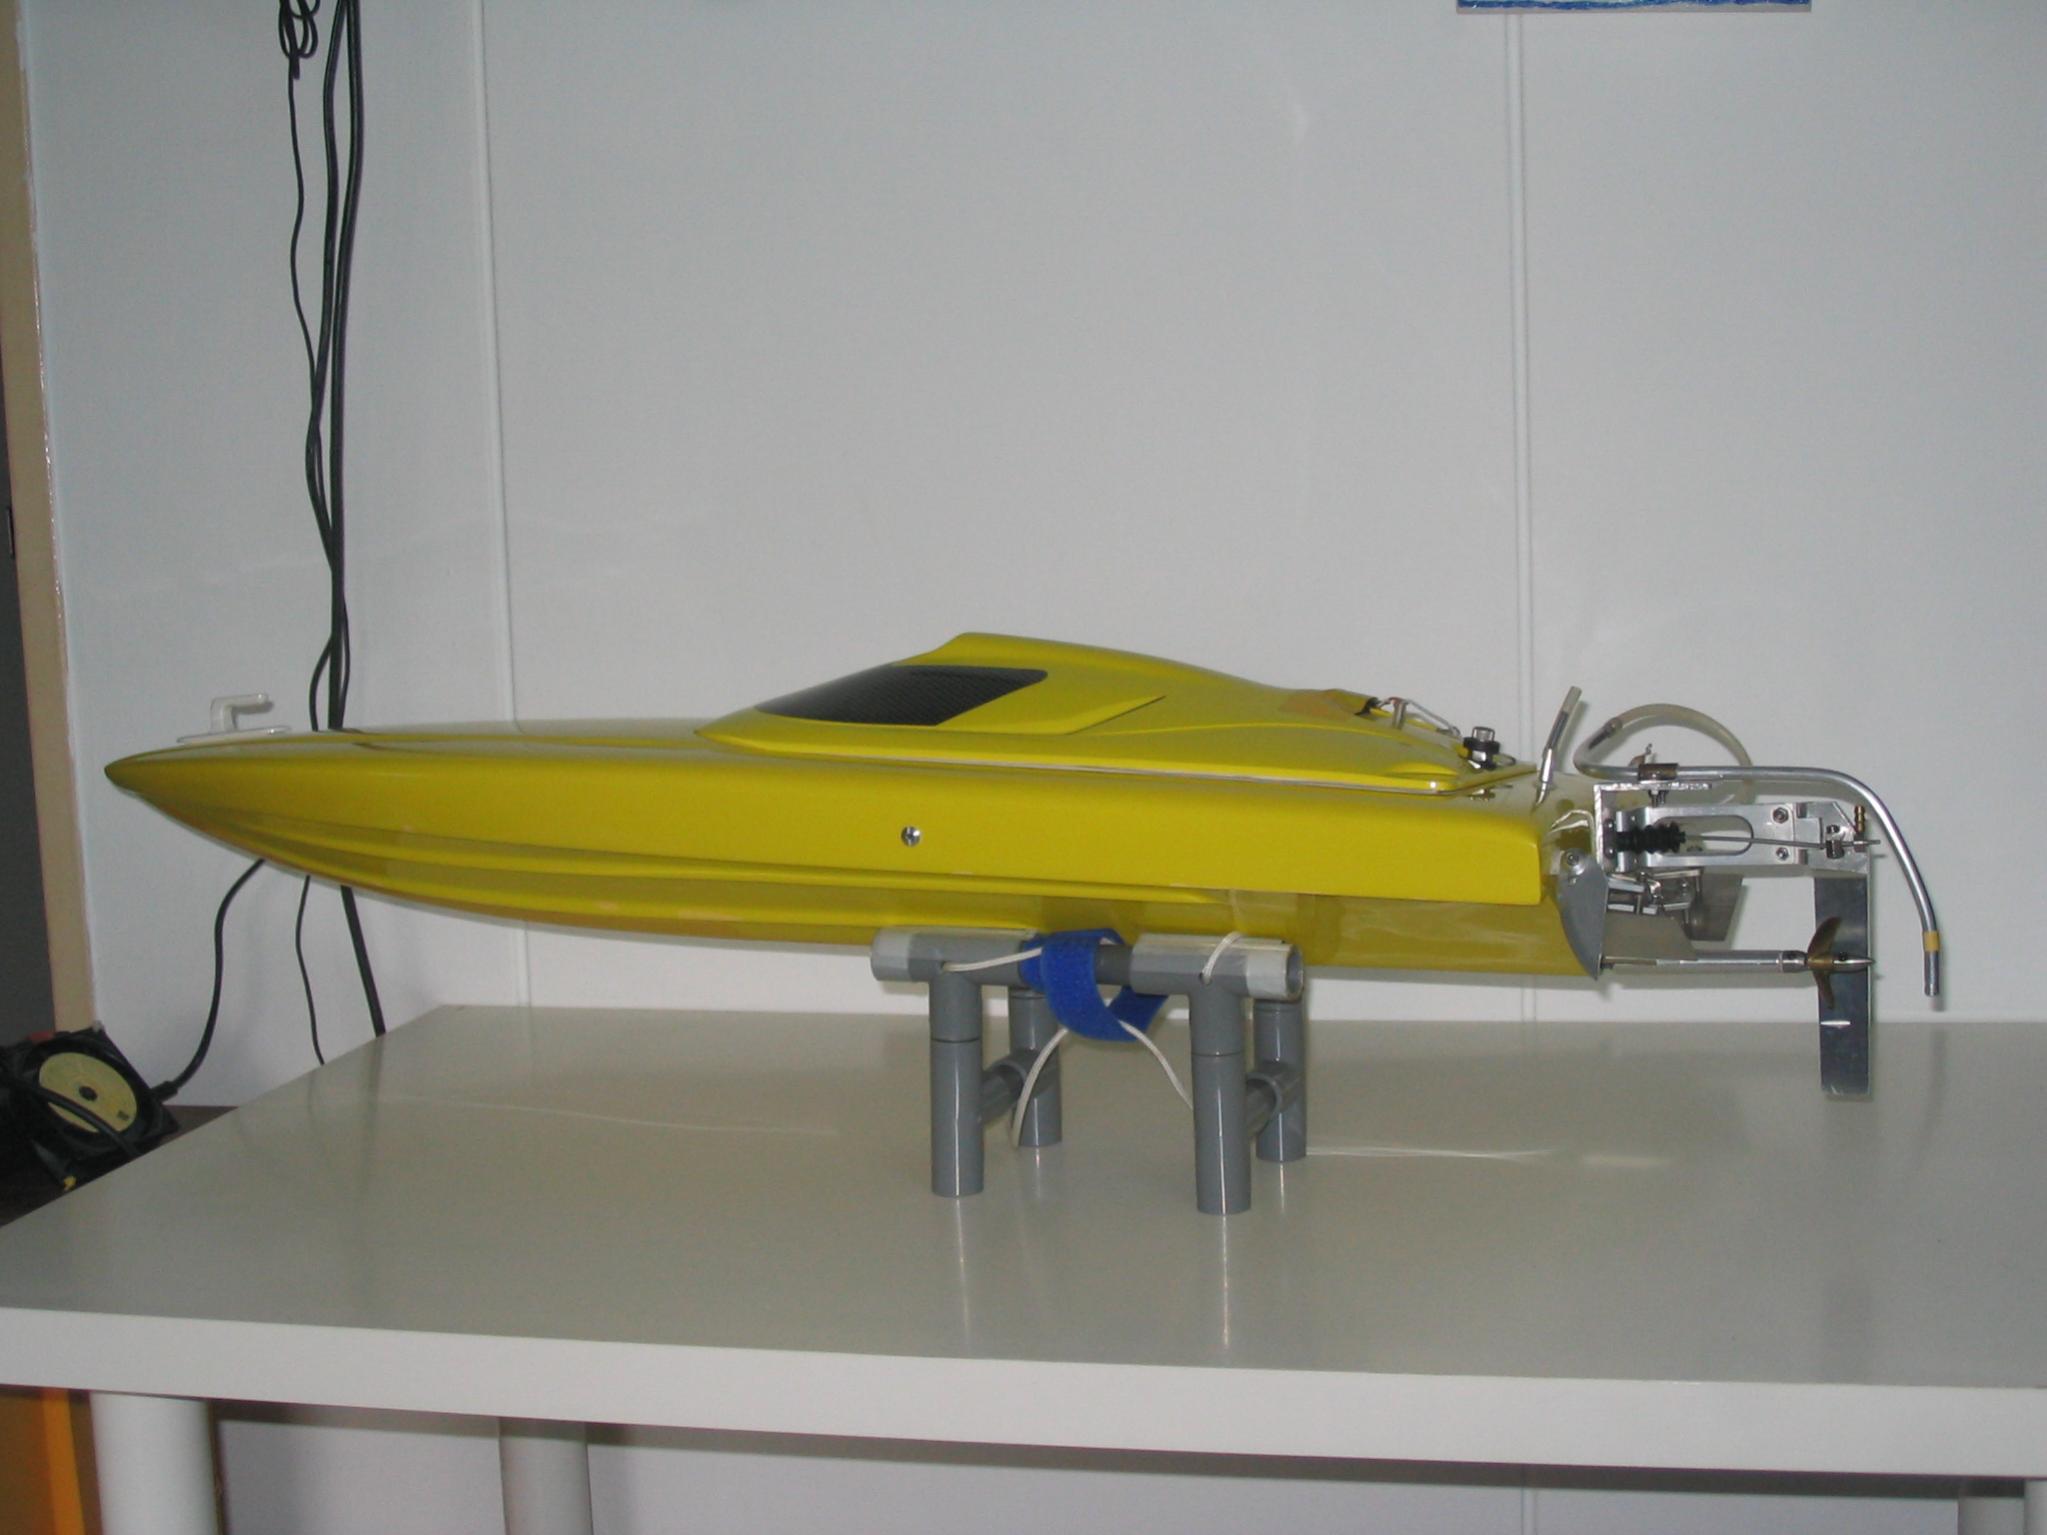 wts 820mm rc boat pursuit brushless v-hull artr - r/c